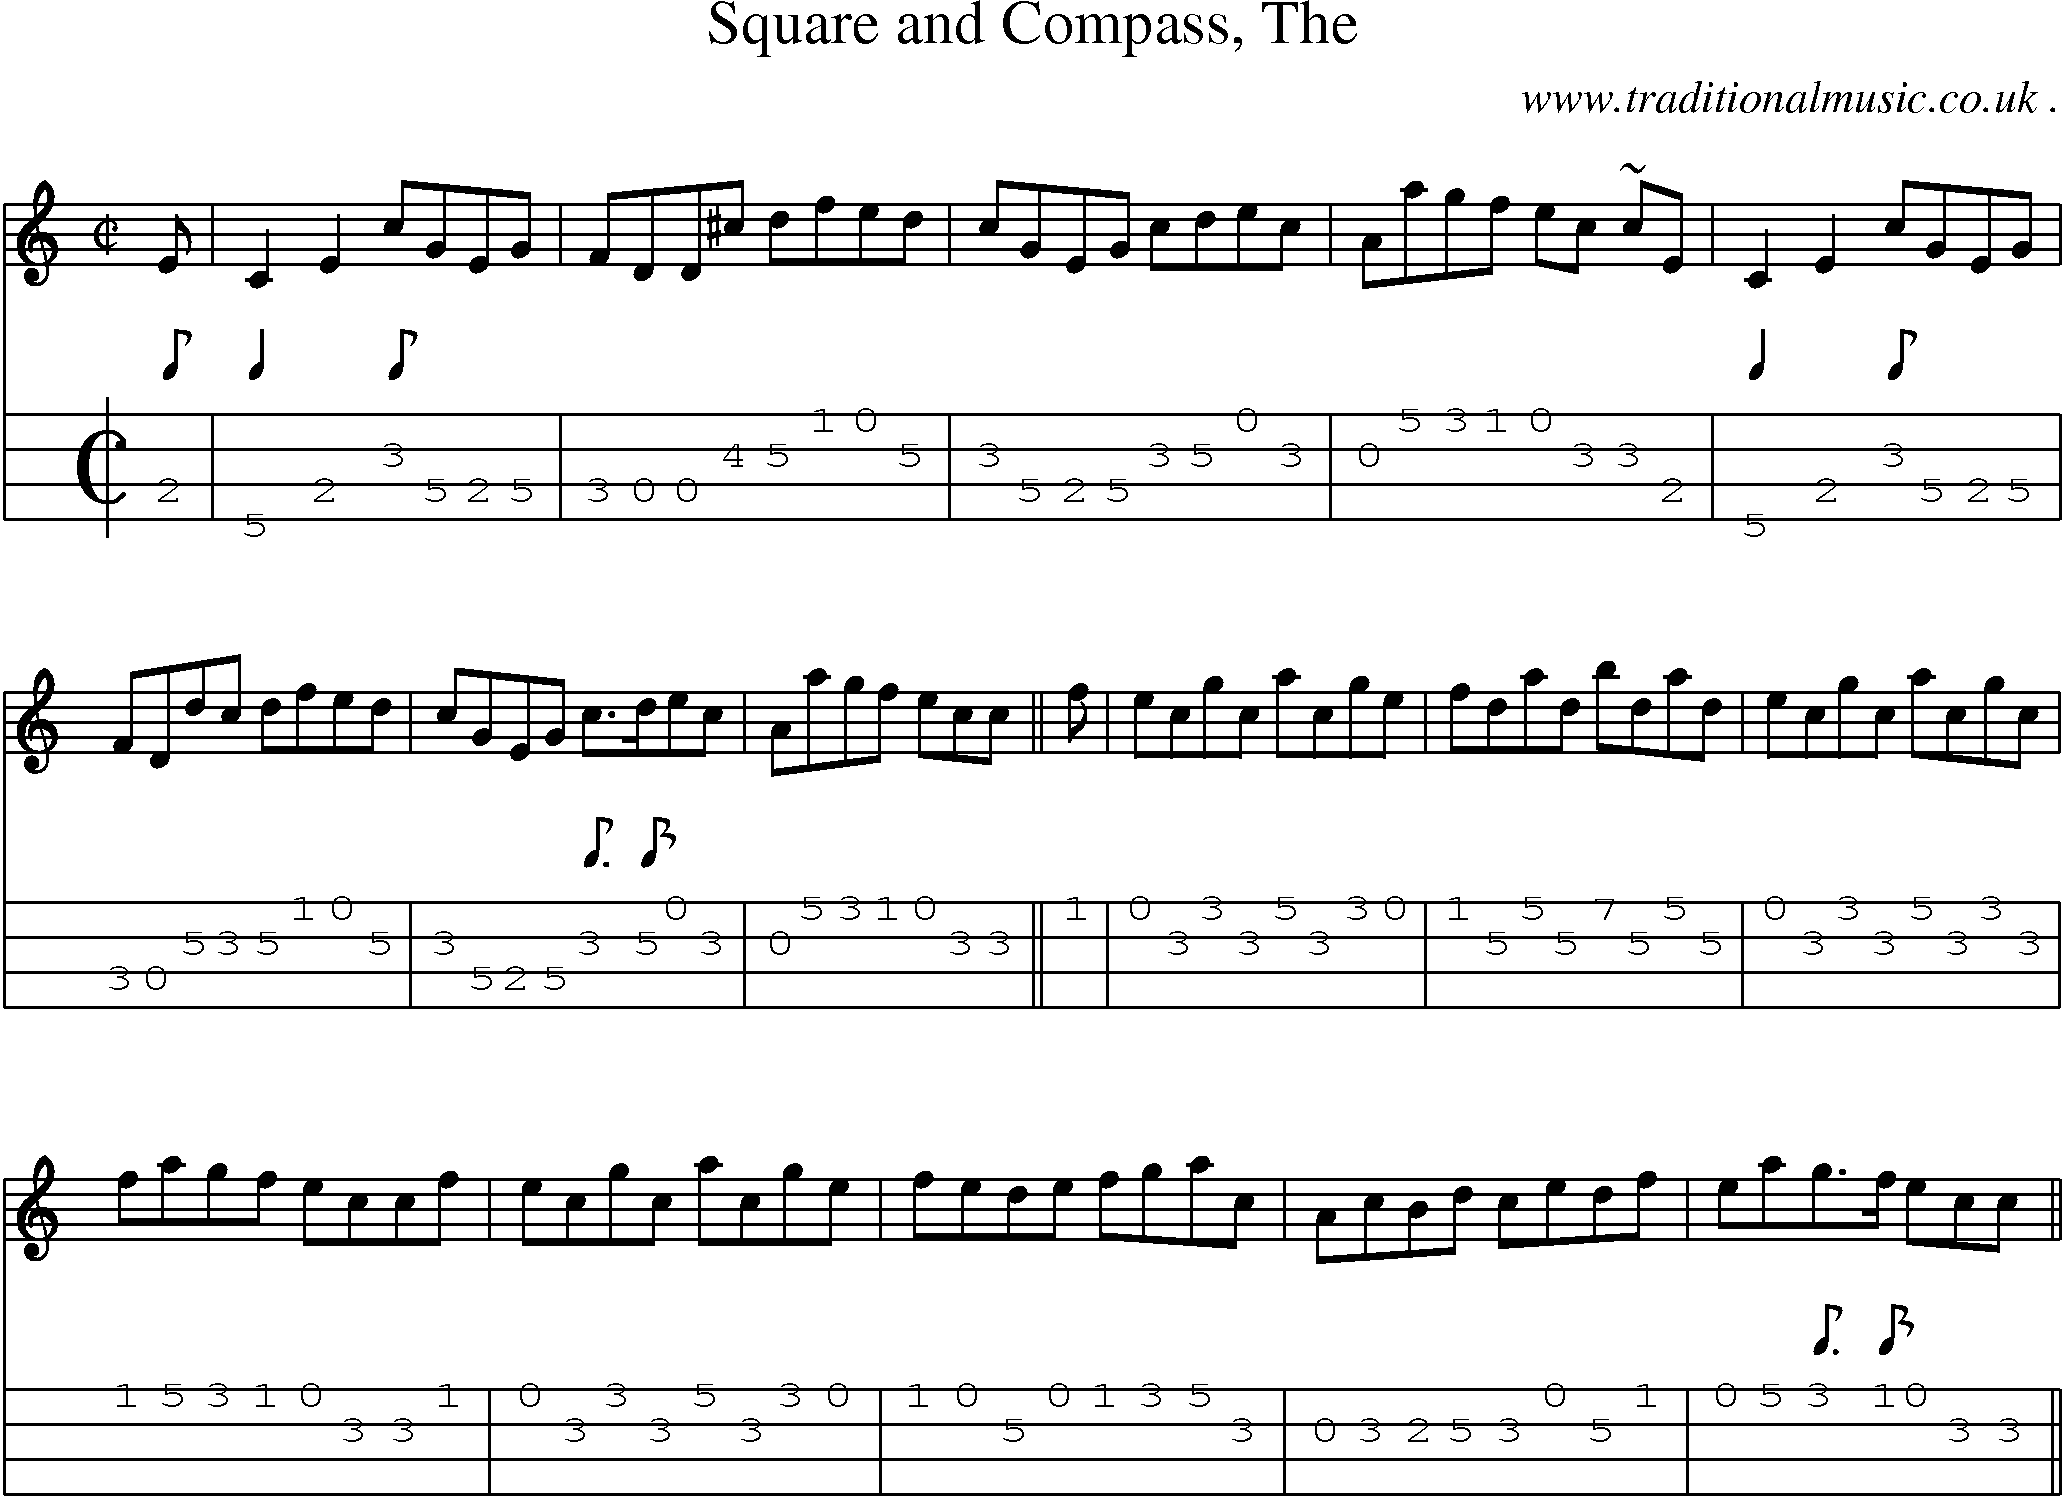 Sheet-music  score, Chords and Mandolin Tabs for Square And Compass The